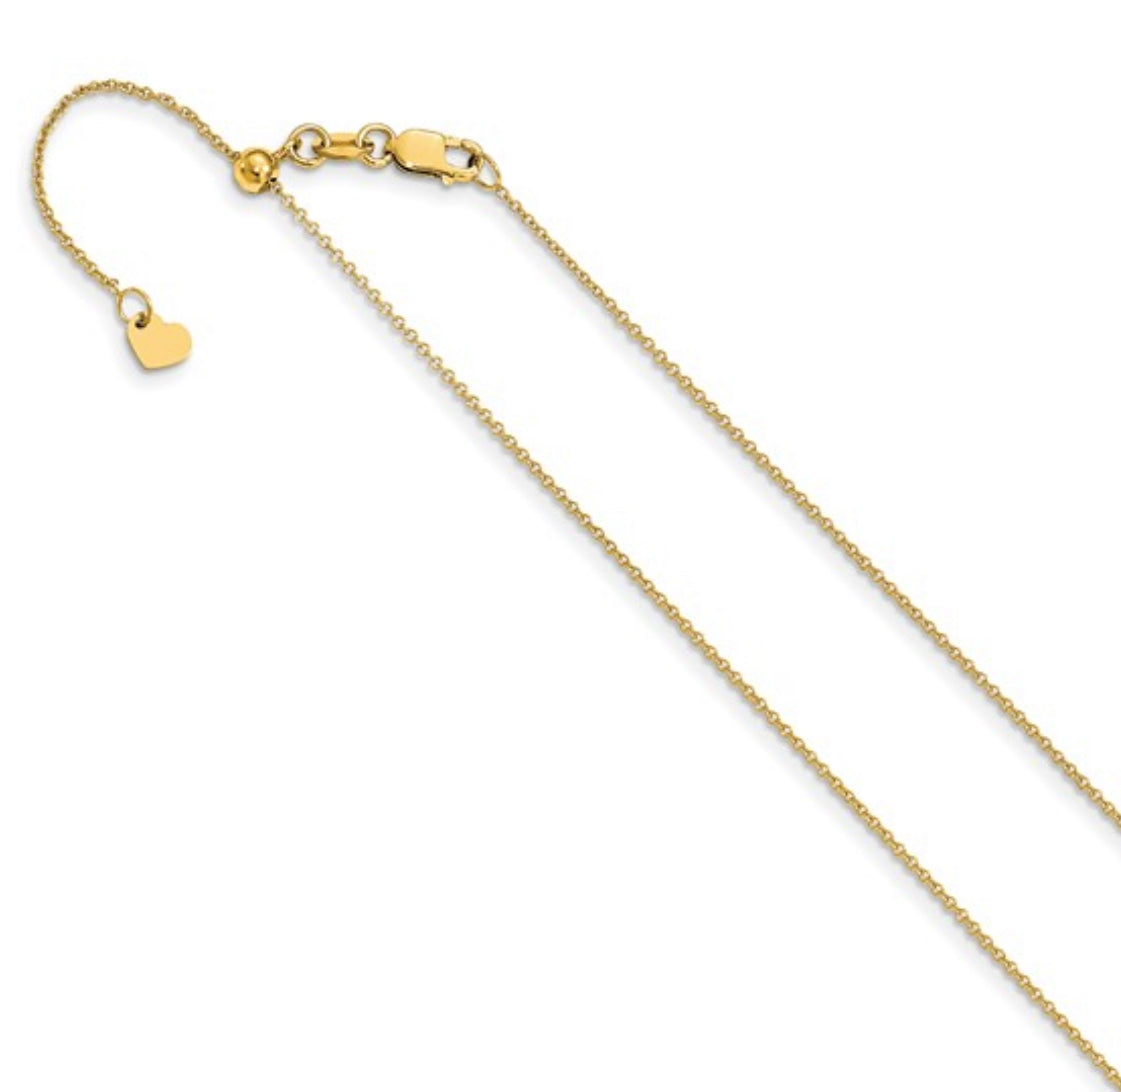 Adjustable 14K Gold Round Cable Chain 16&quot; - 22&quot; - 1.1mm